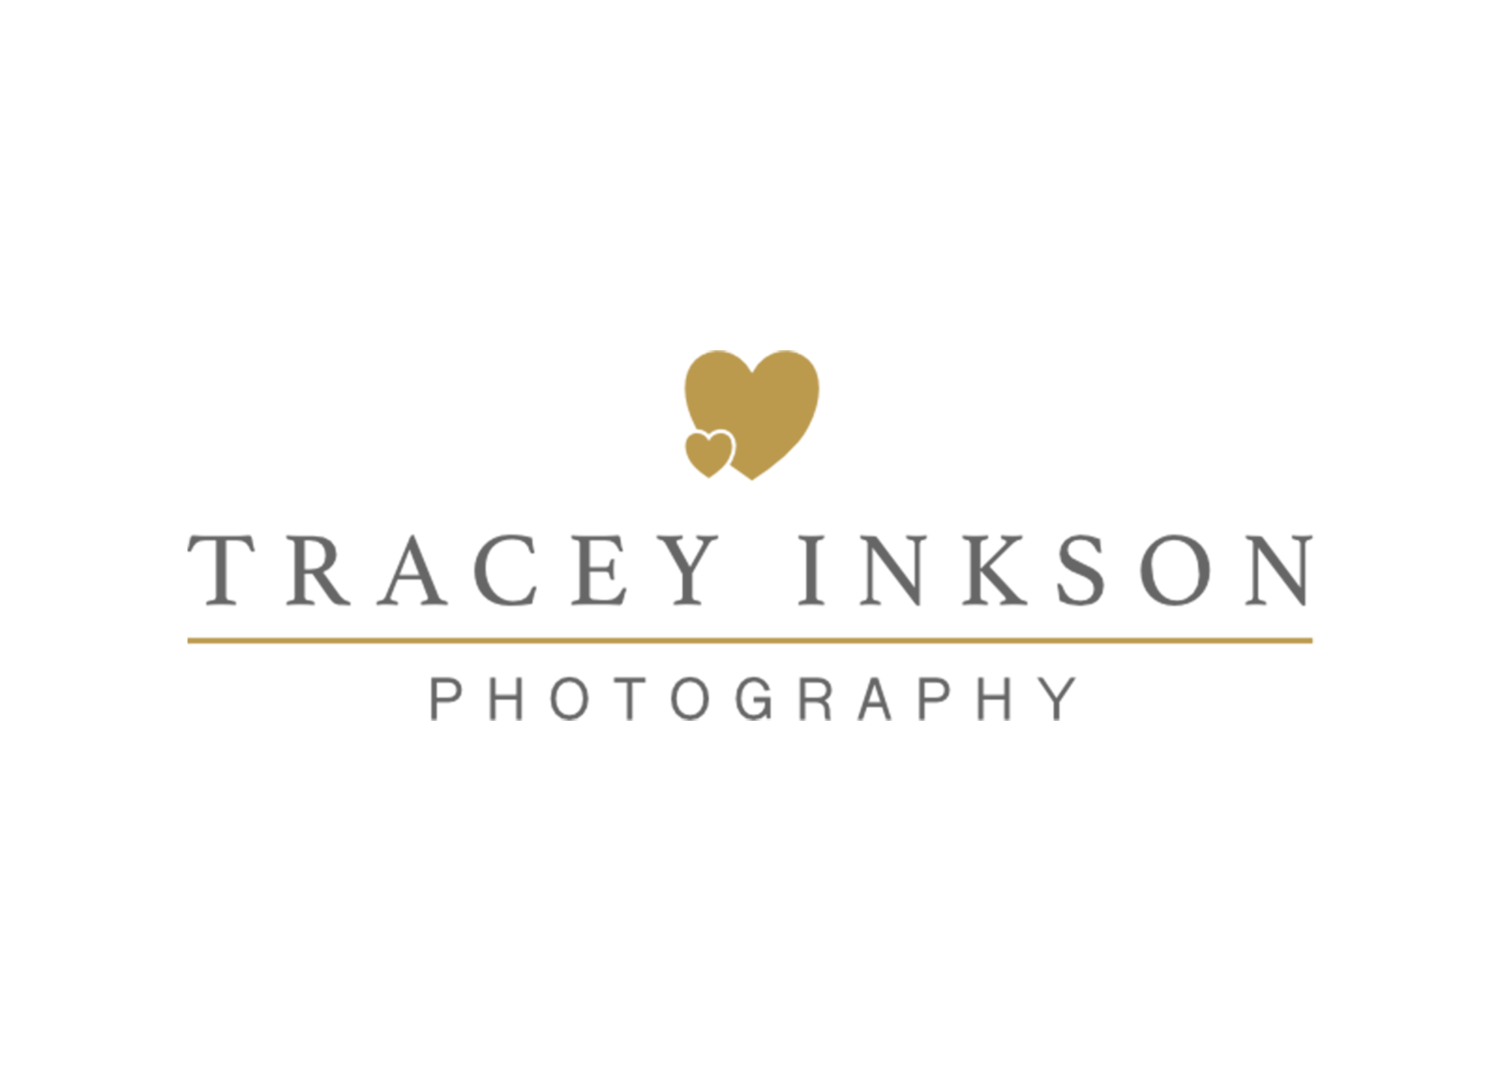 Tracey Inkson Photography